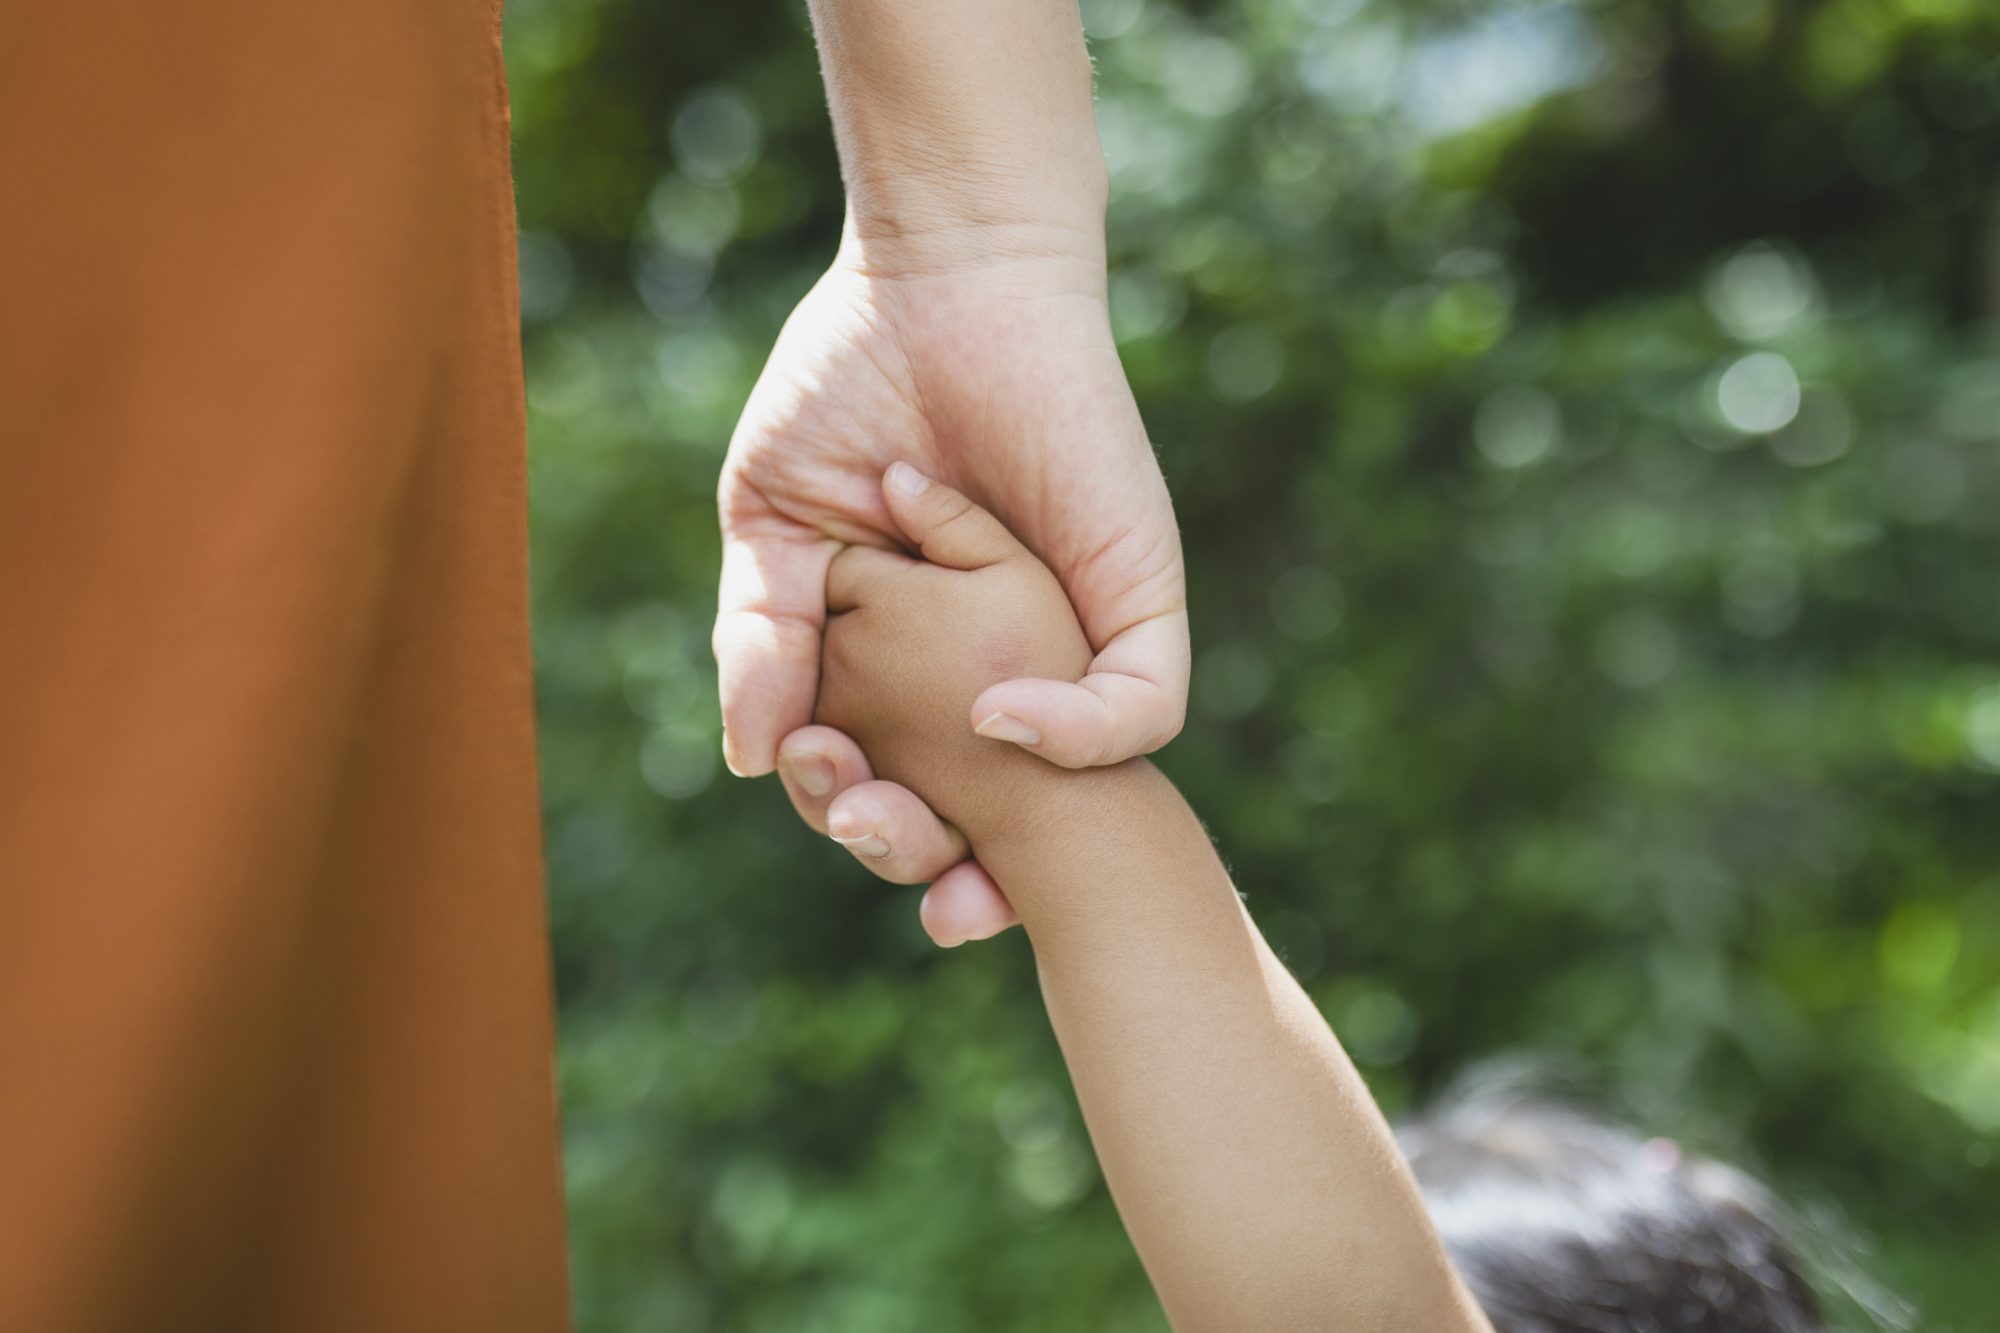 An image of a woman holding a child's hand.